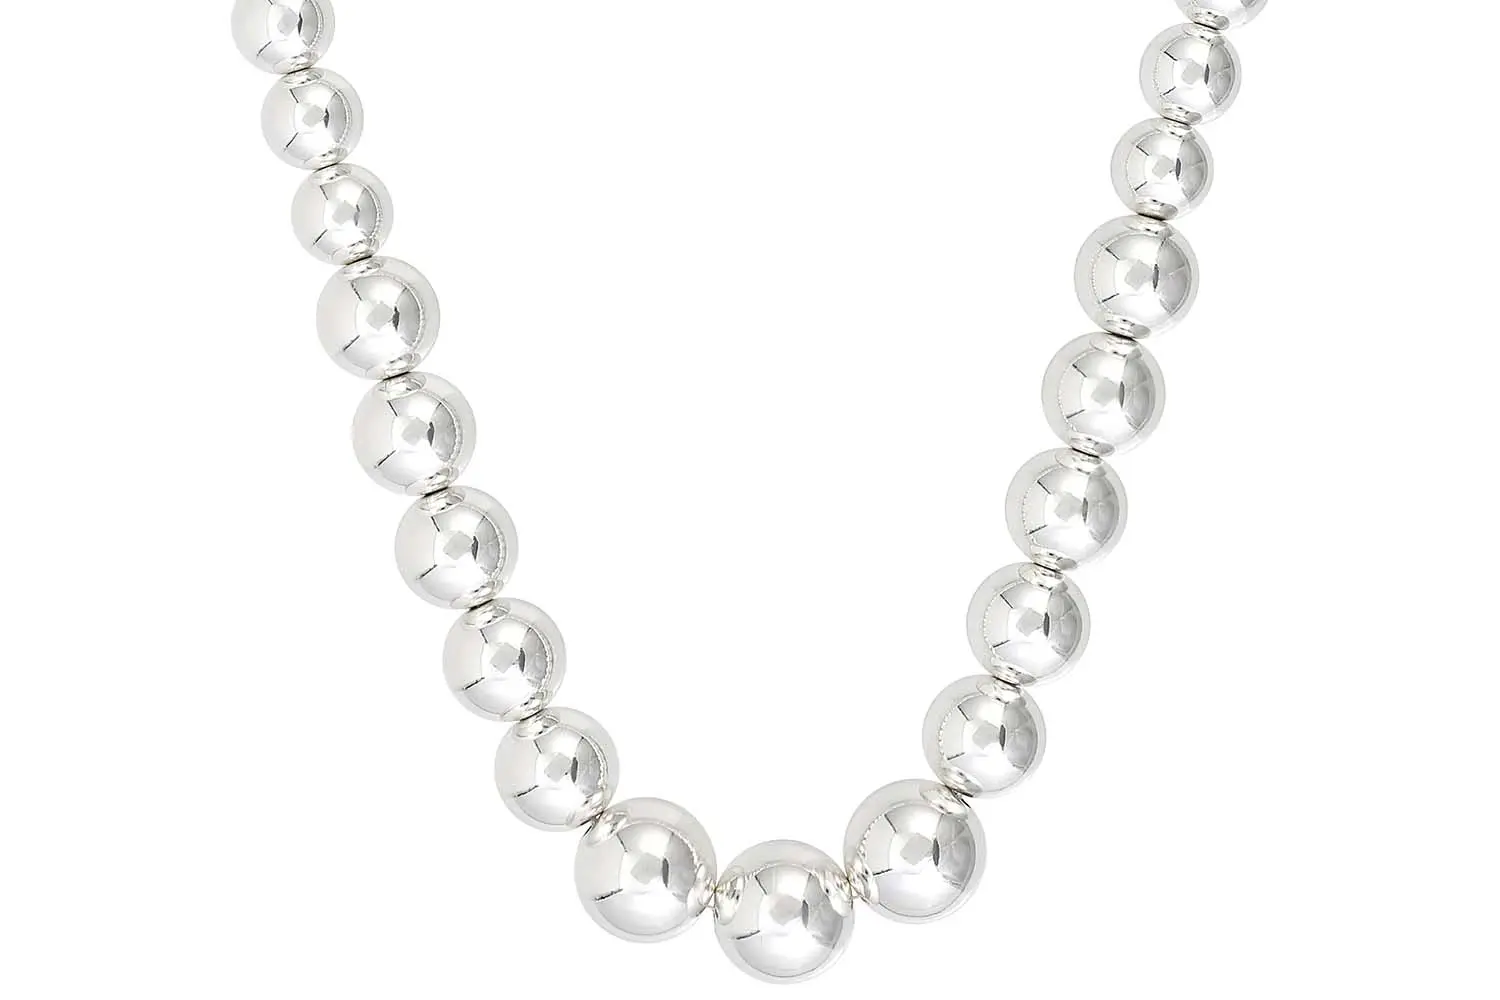 Kette - Reflective Pearls